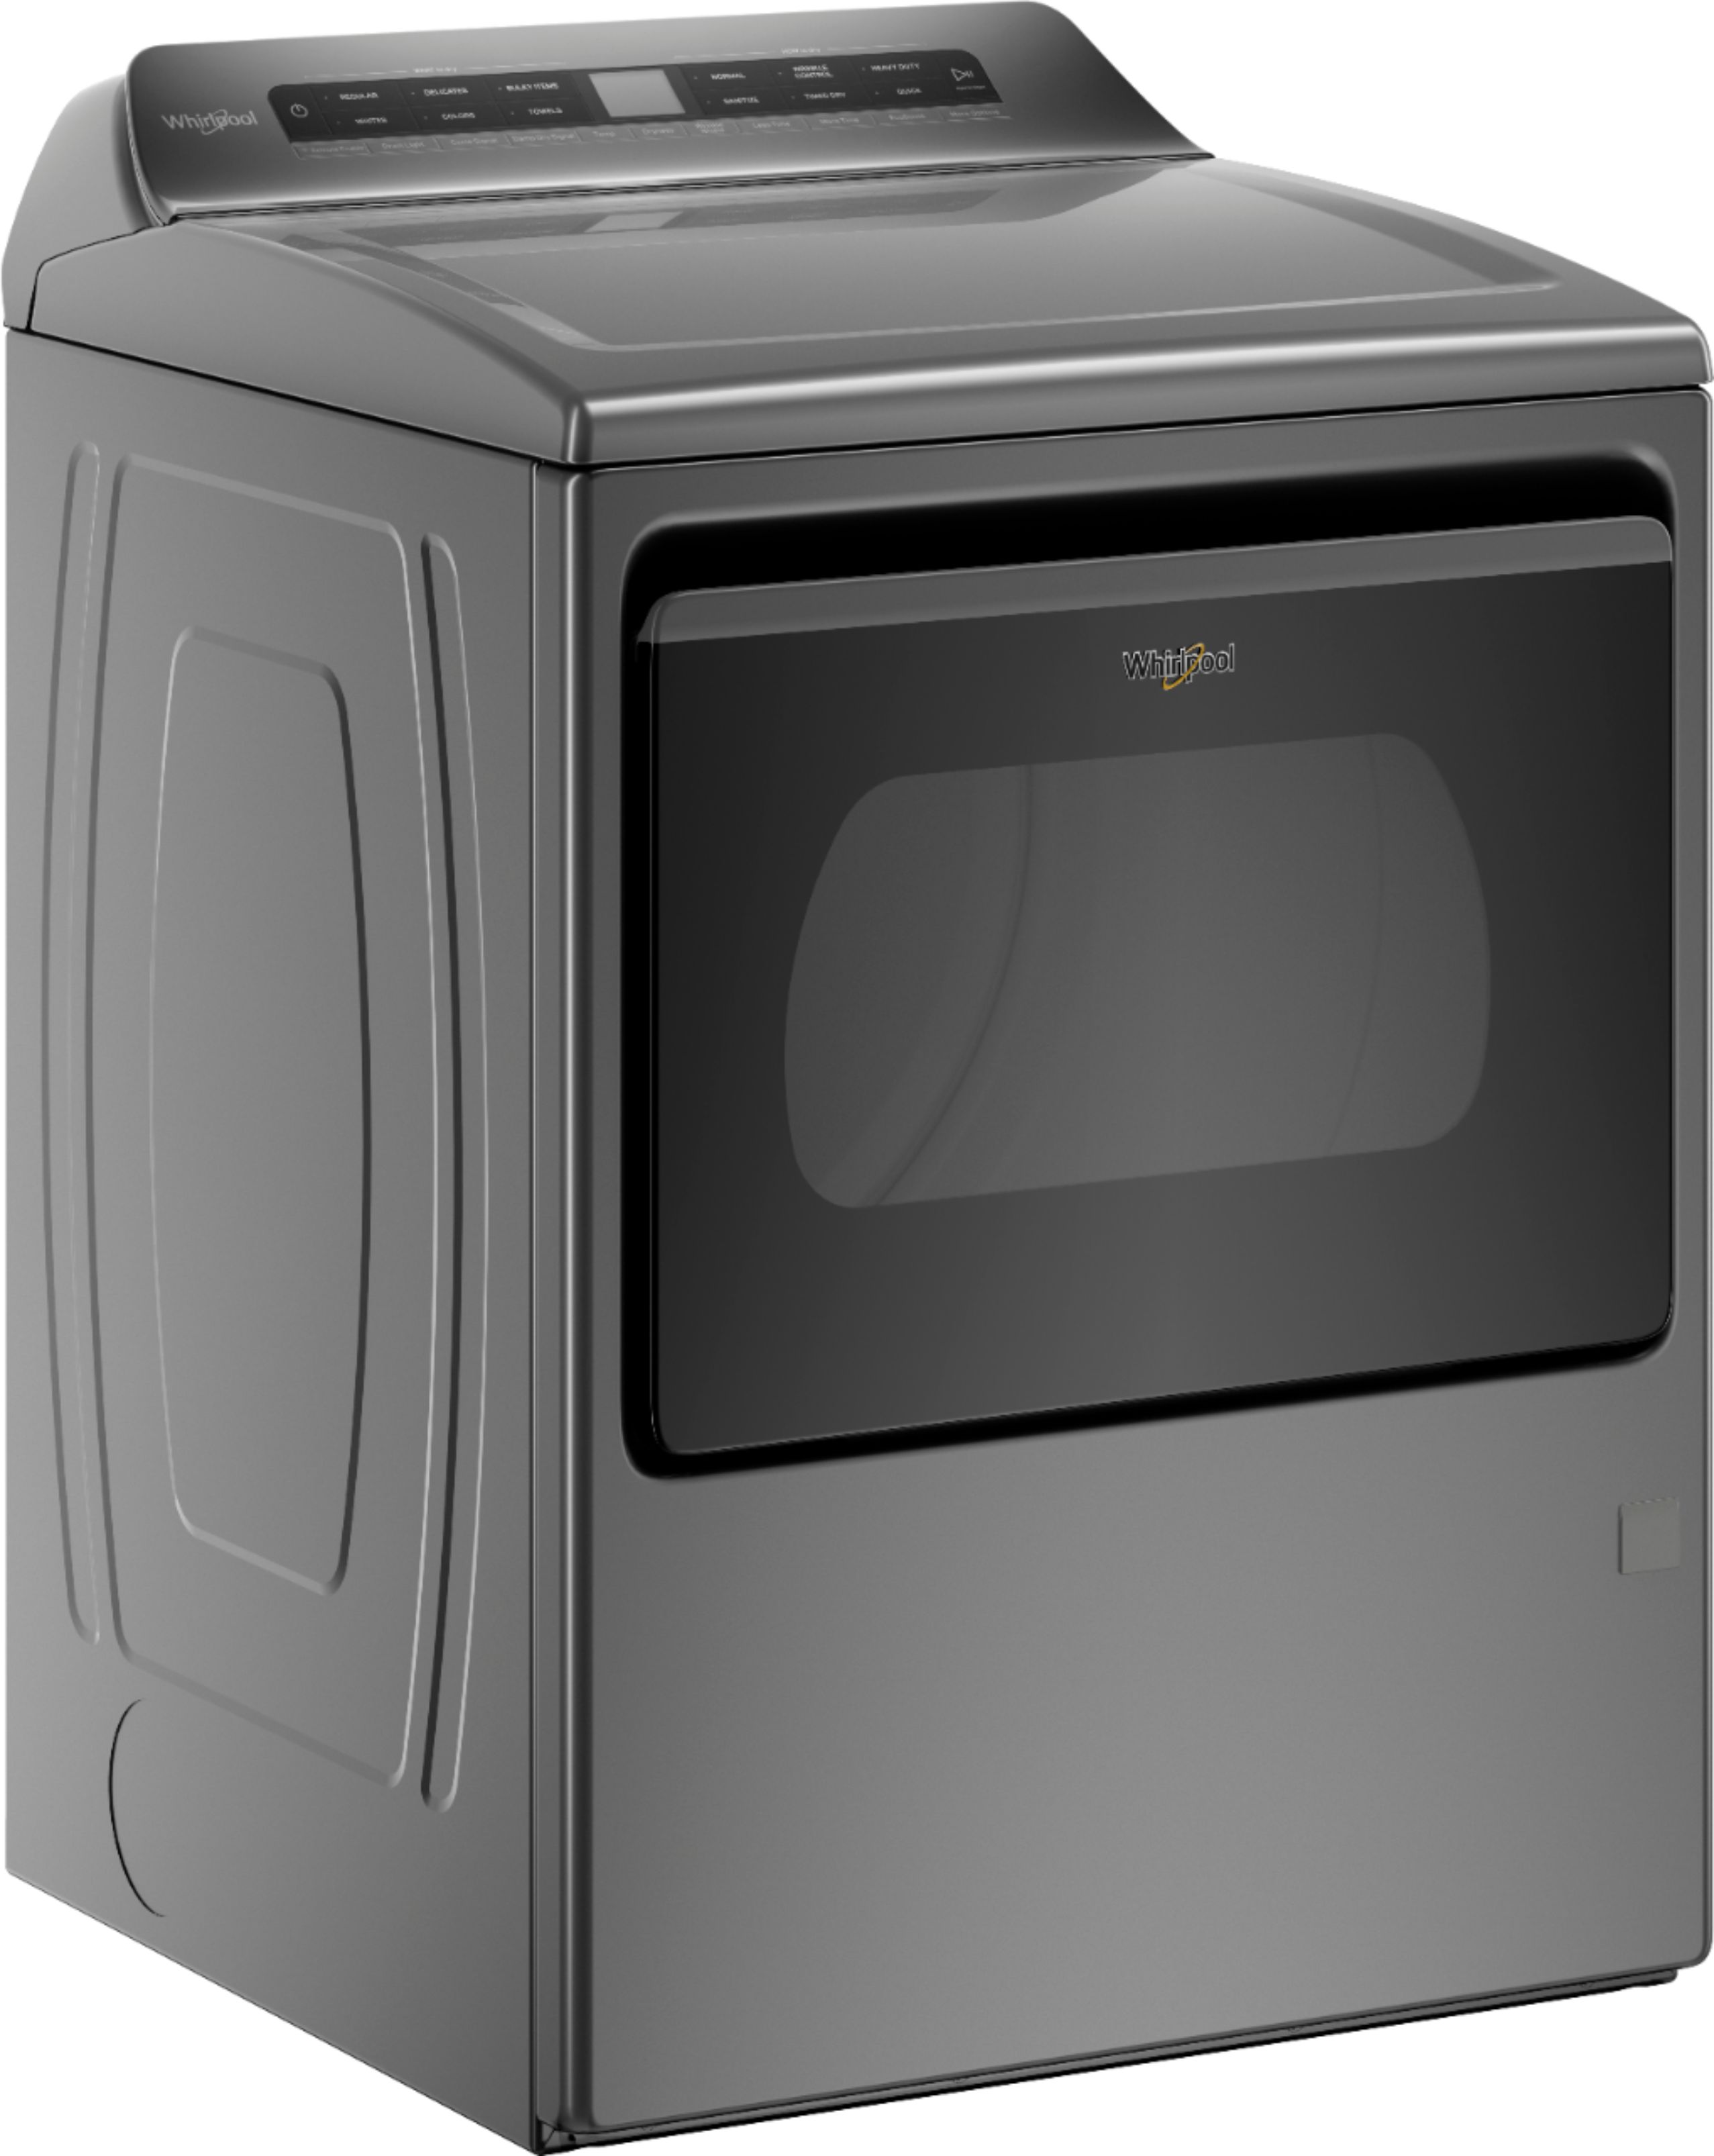 Whirlpool - 7.4 Cu. Ft. Smart Gas Dryer with Intuitive Controls - Chrome shadow